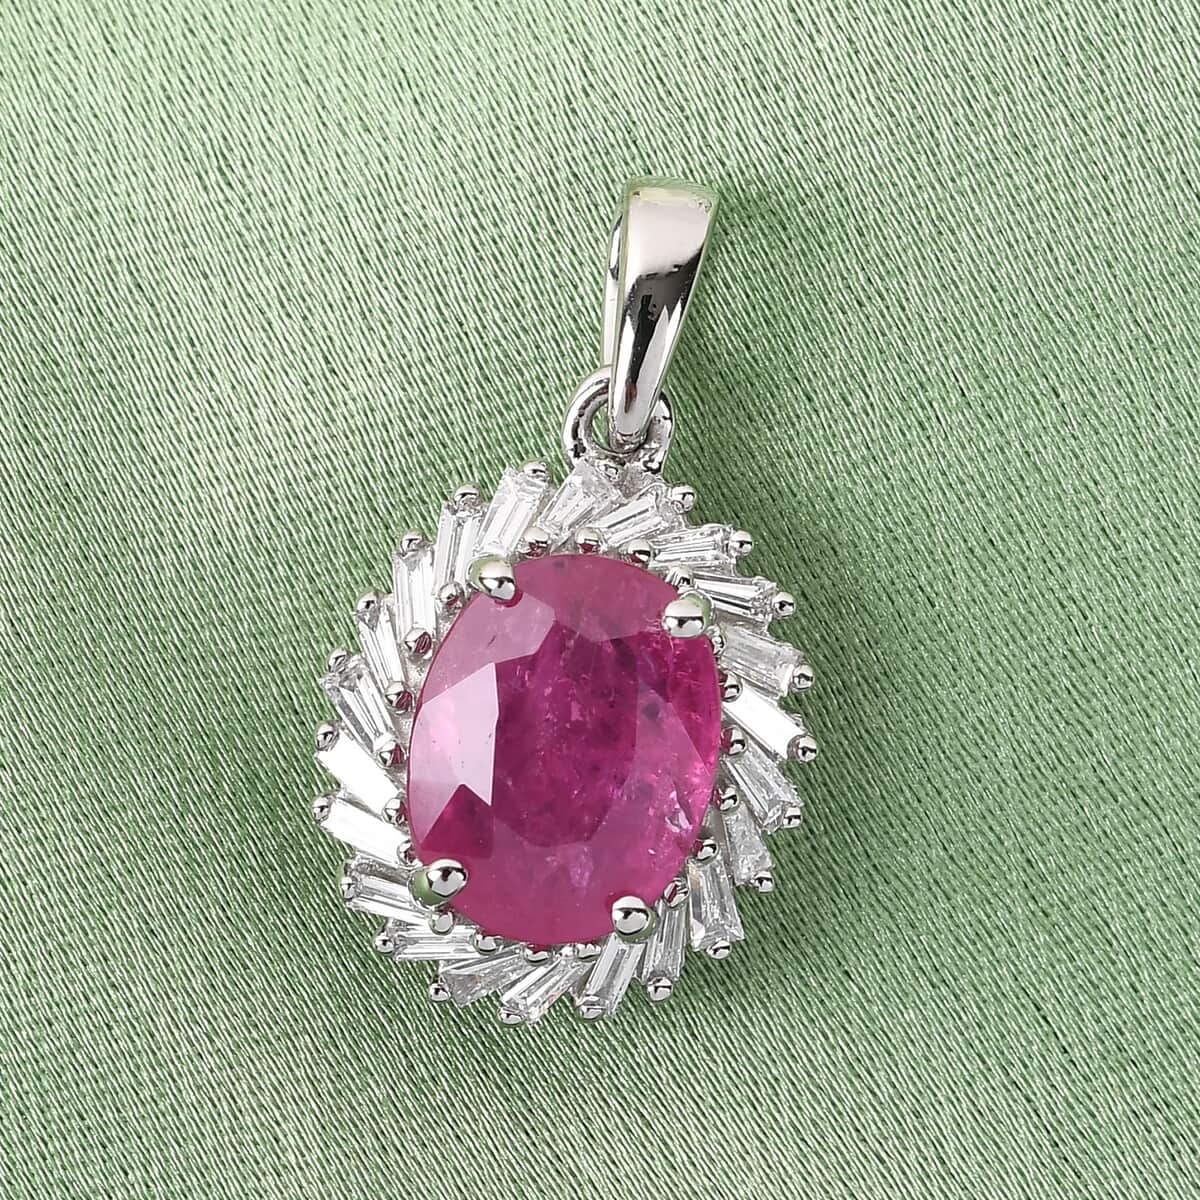 Rhapsody 950 Platinum AAAA Mozambique Ruby and E-F VS Diamond Halo Pendant 2.65 ctw image number 1